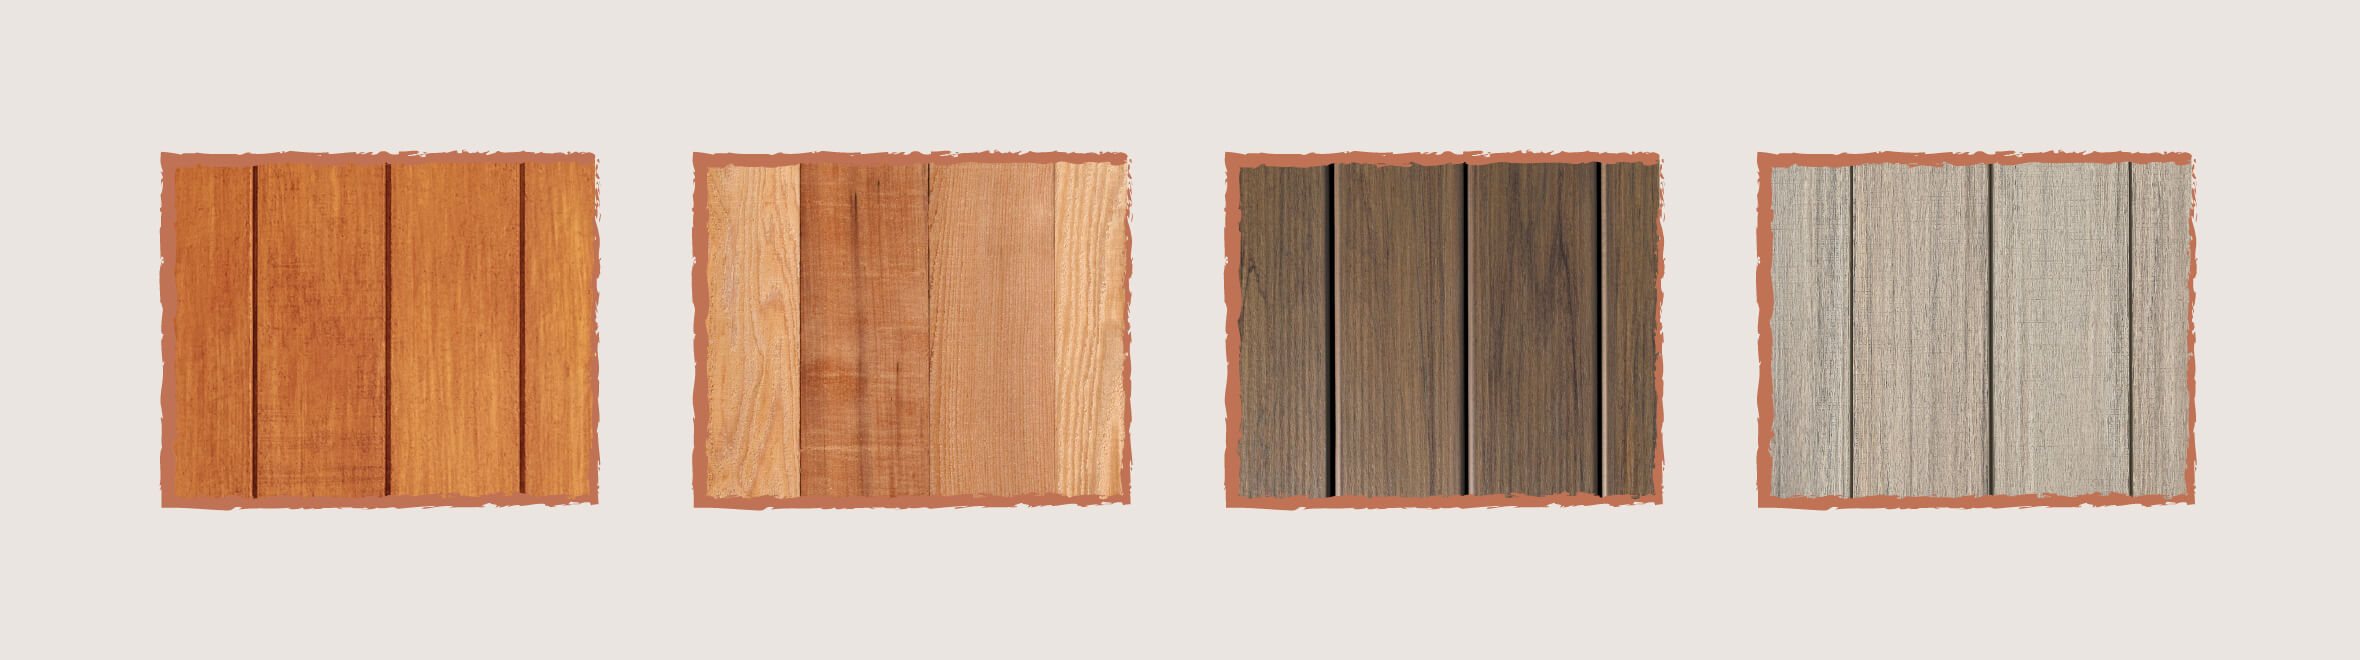 Wood Comparison: Choosing the Best Type for Your Project